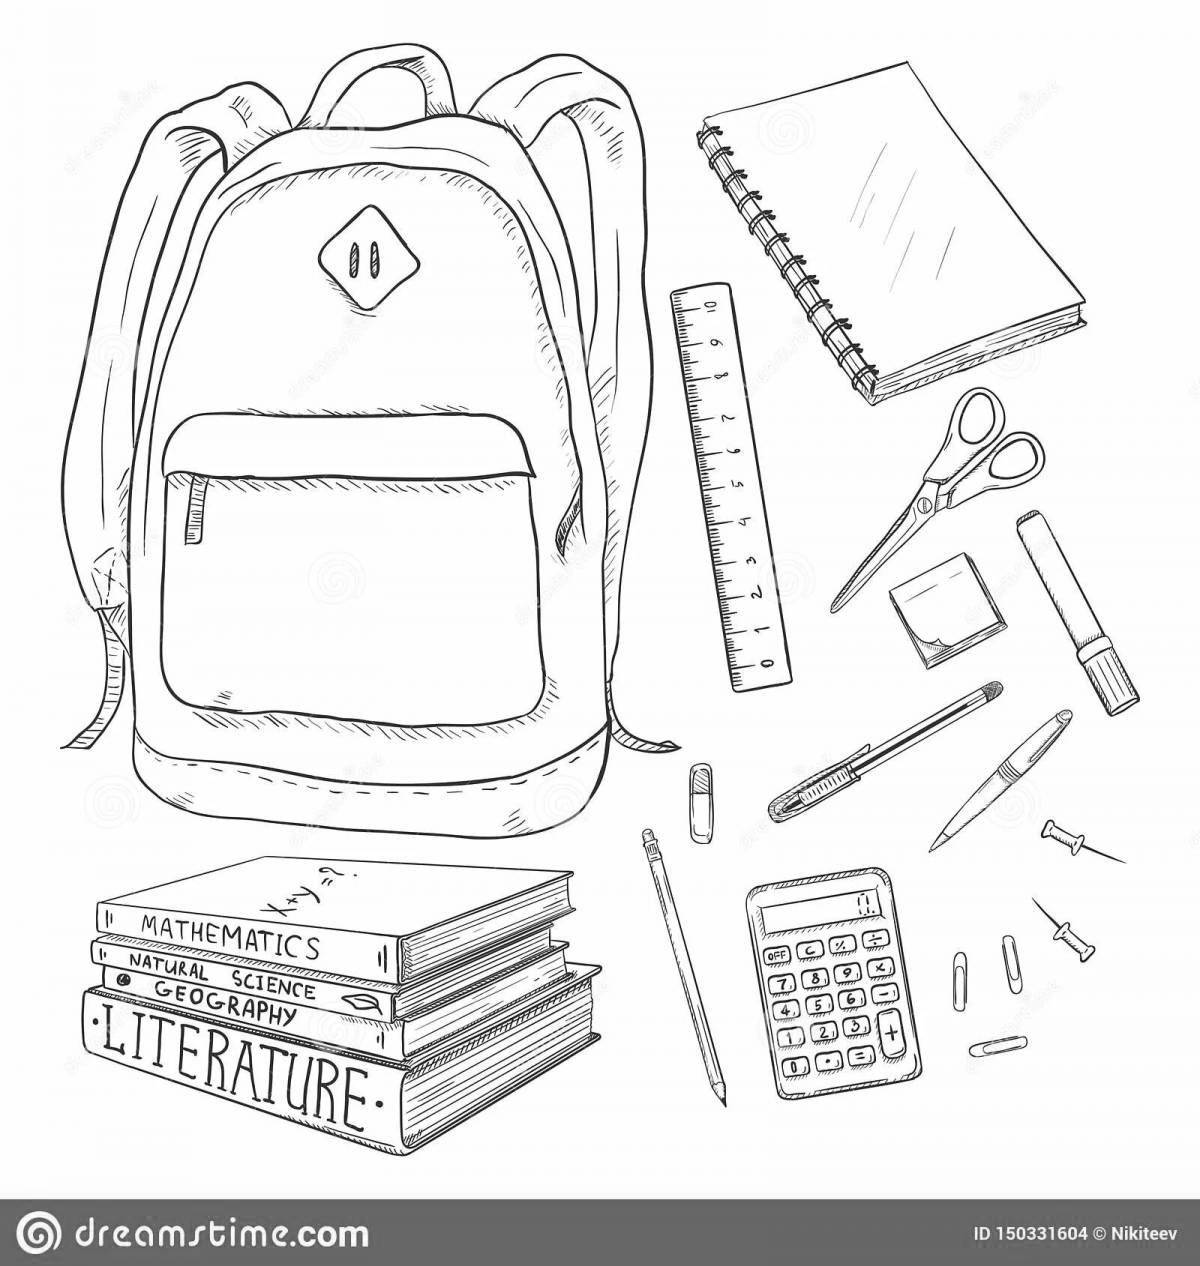 Coloring page of school subjects